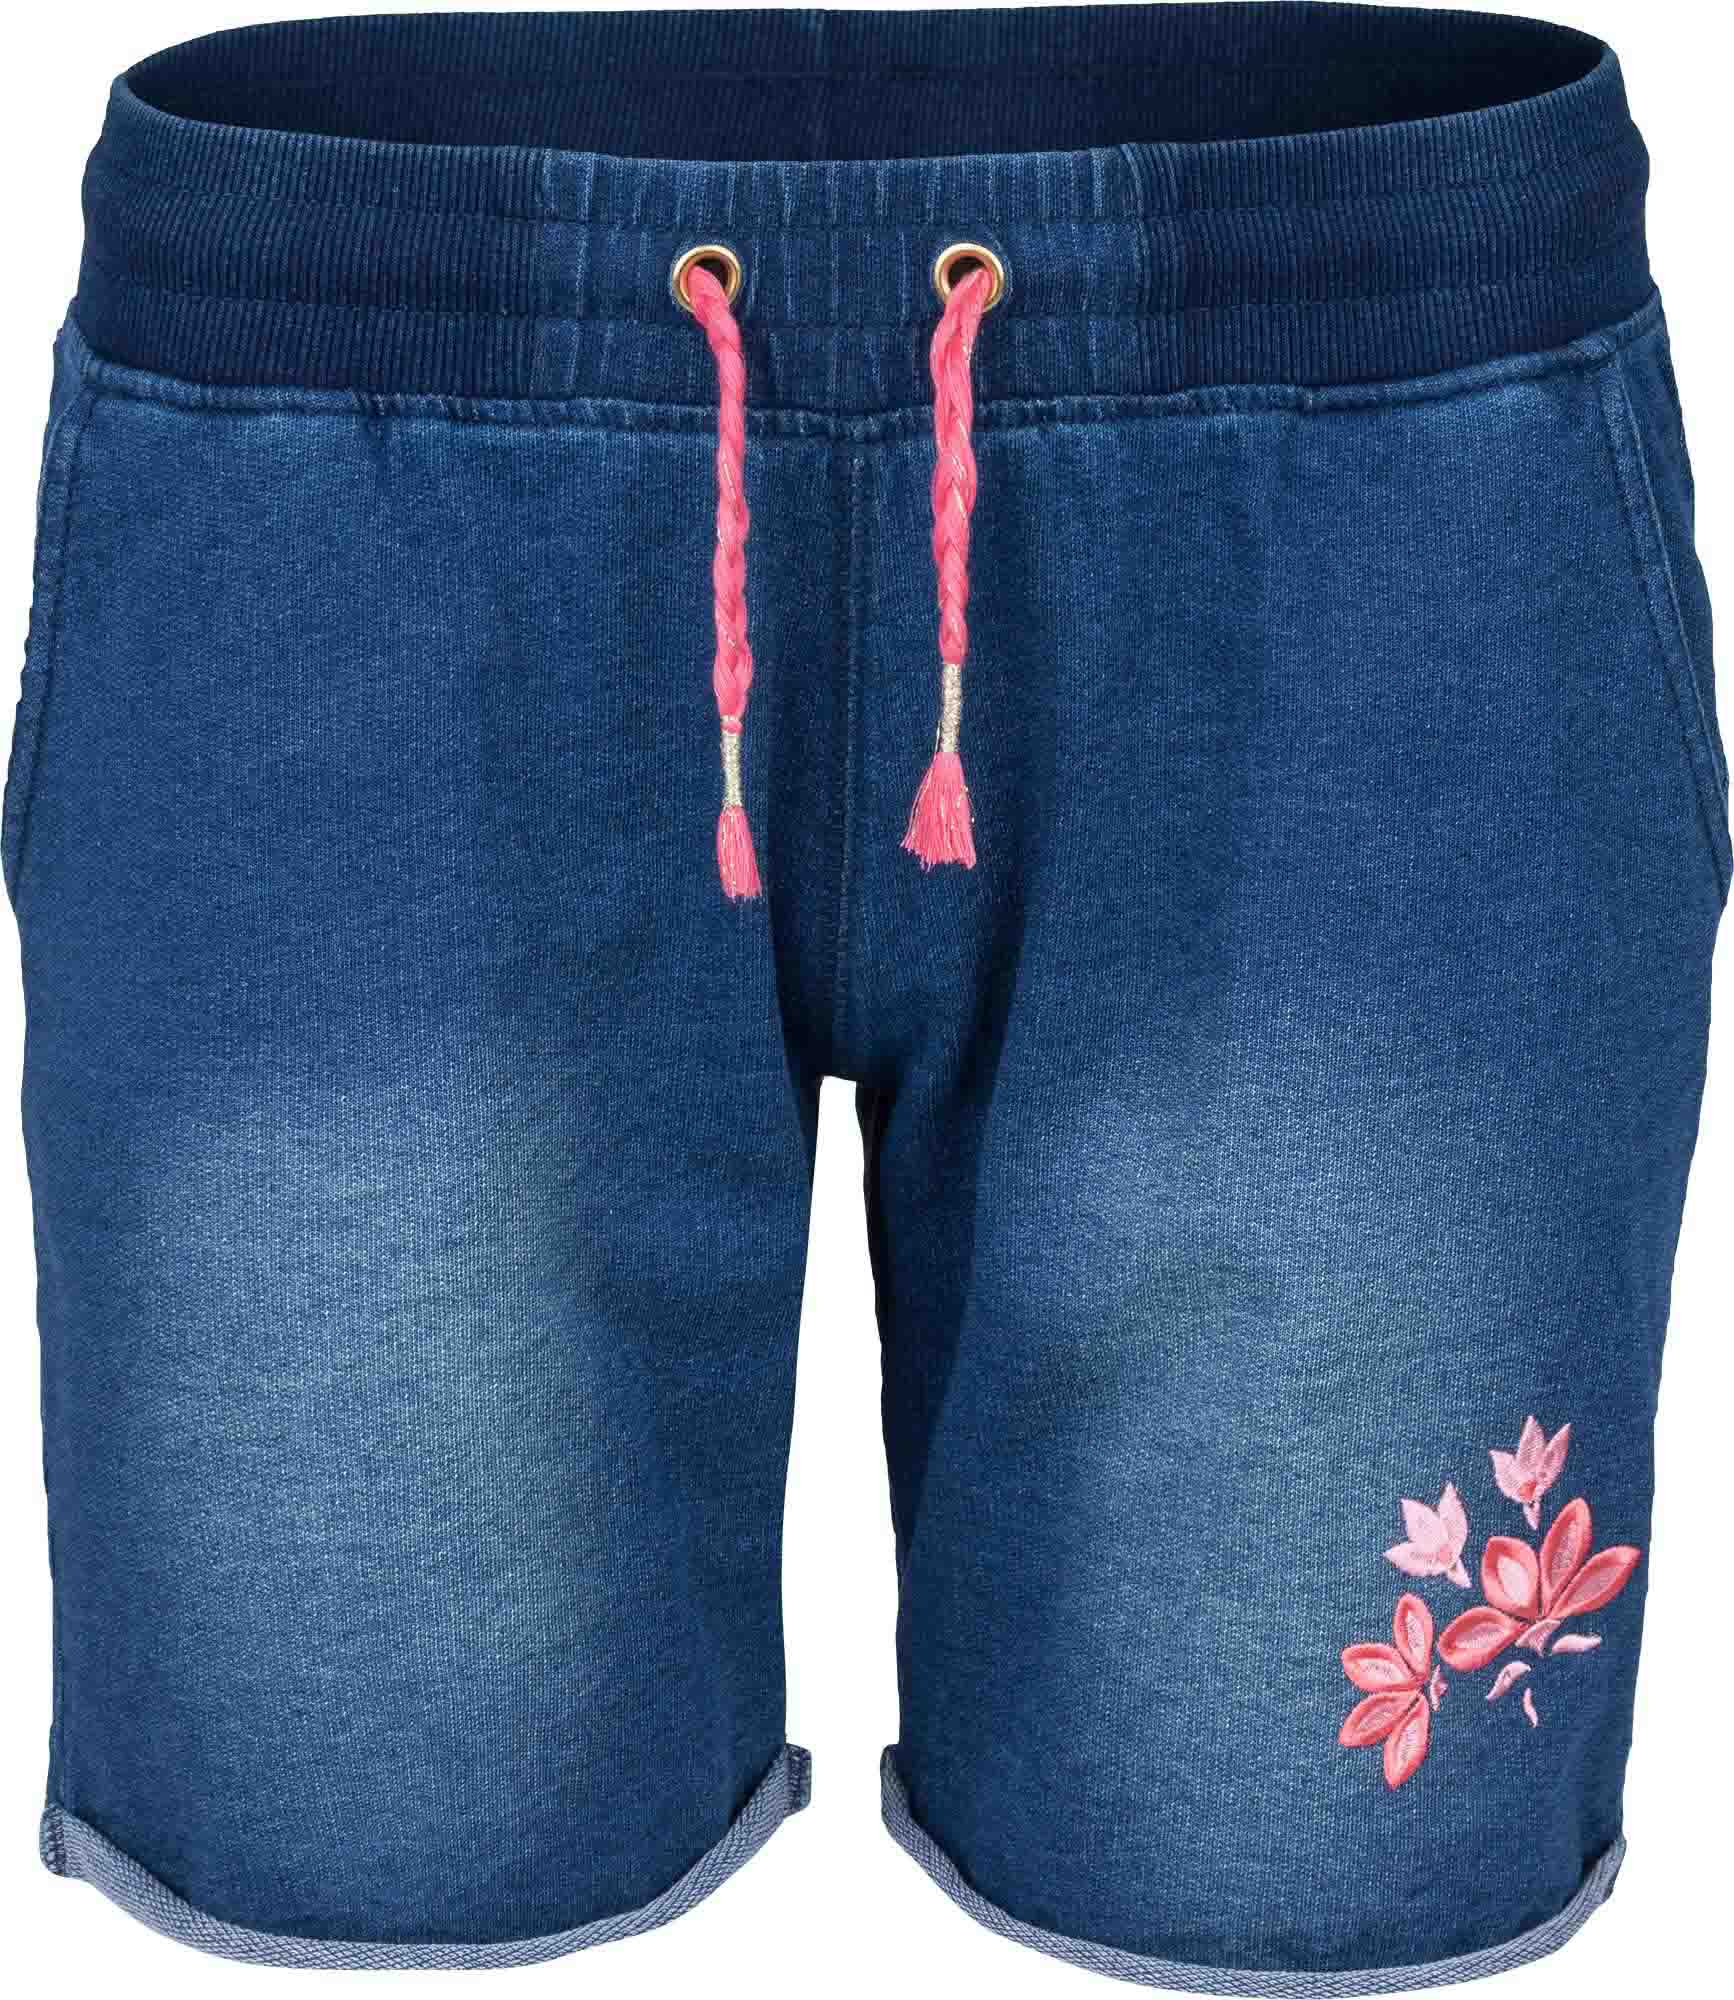 Women’s shorts with a denim look